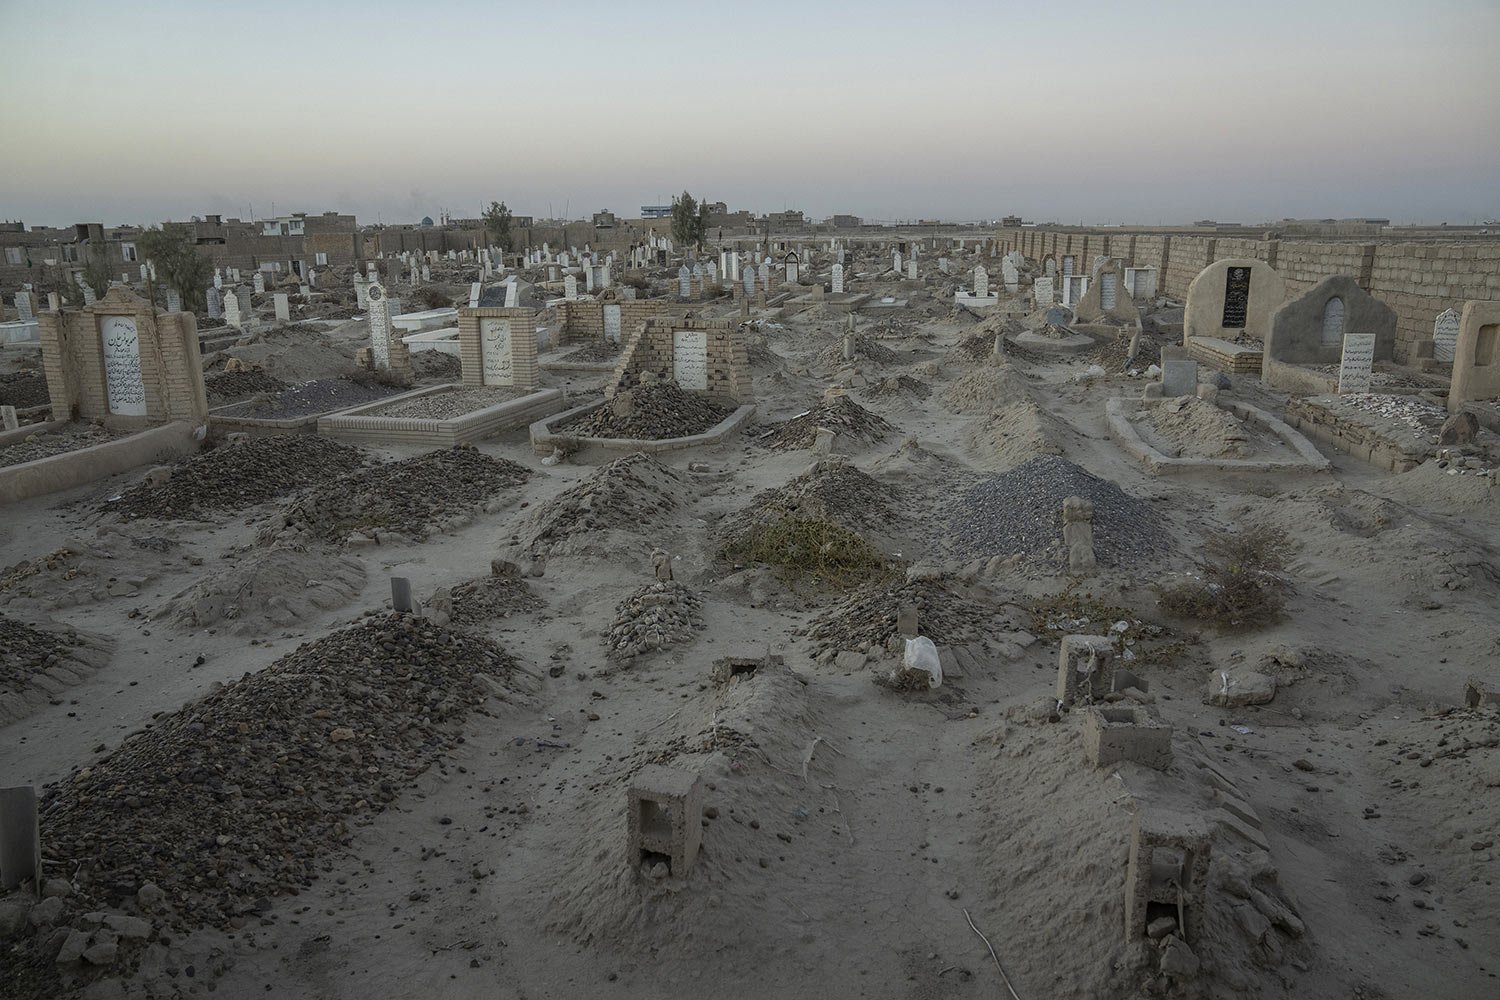  An Afghan Shiite cemetery, where a large number of Shiite migrants who were killed while trying to cross the border are buried, lies on the outskirts of Zaranj city, Afghanistan, Dec. 25, 2023. (AP Photo/Ebrahim Noroozi) 